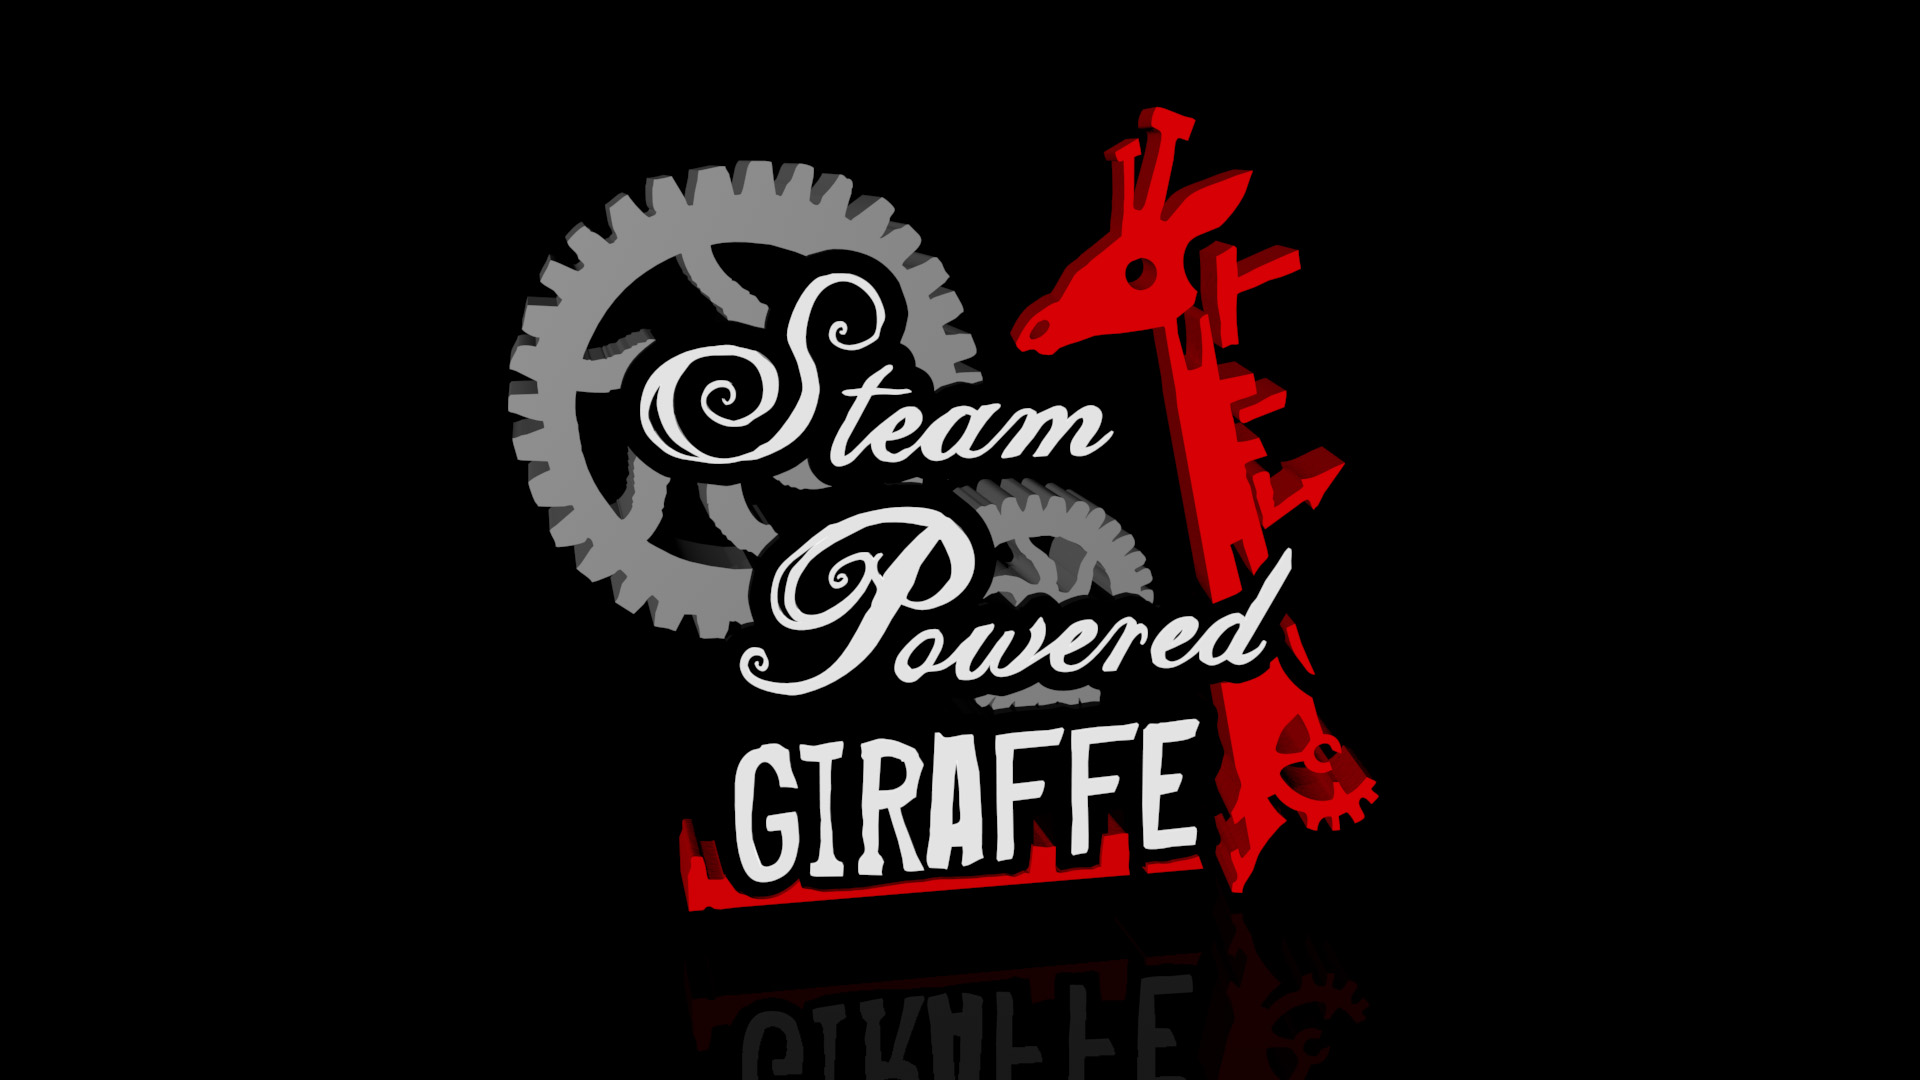 Is powered by steam фото 68